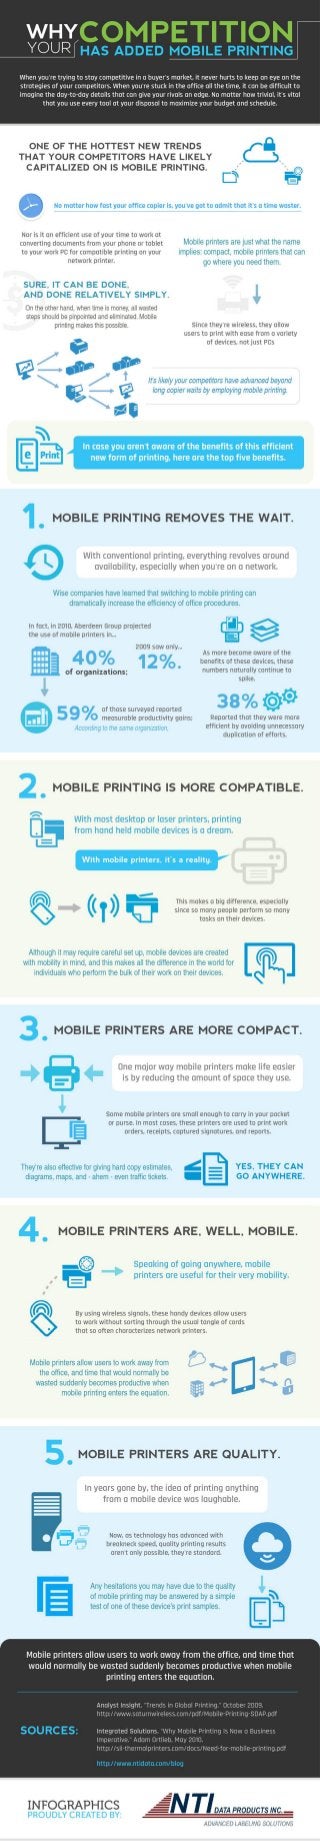 Why Your Competition Has Added Mobile Printing